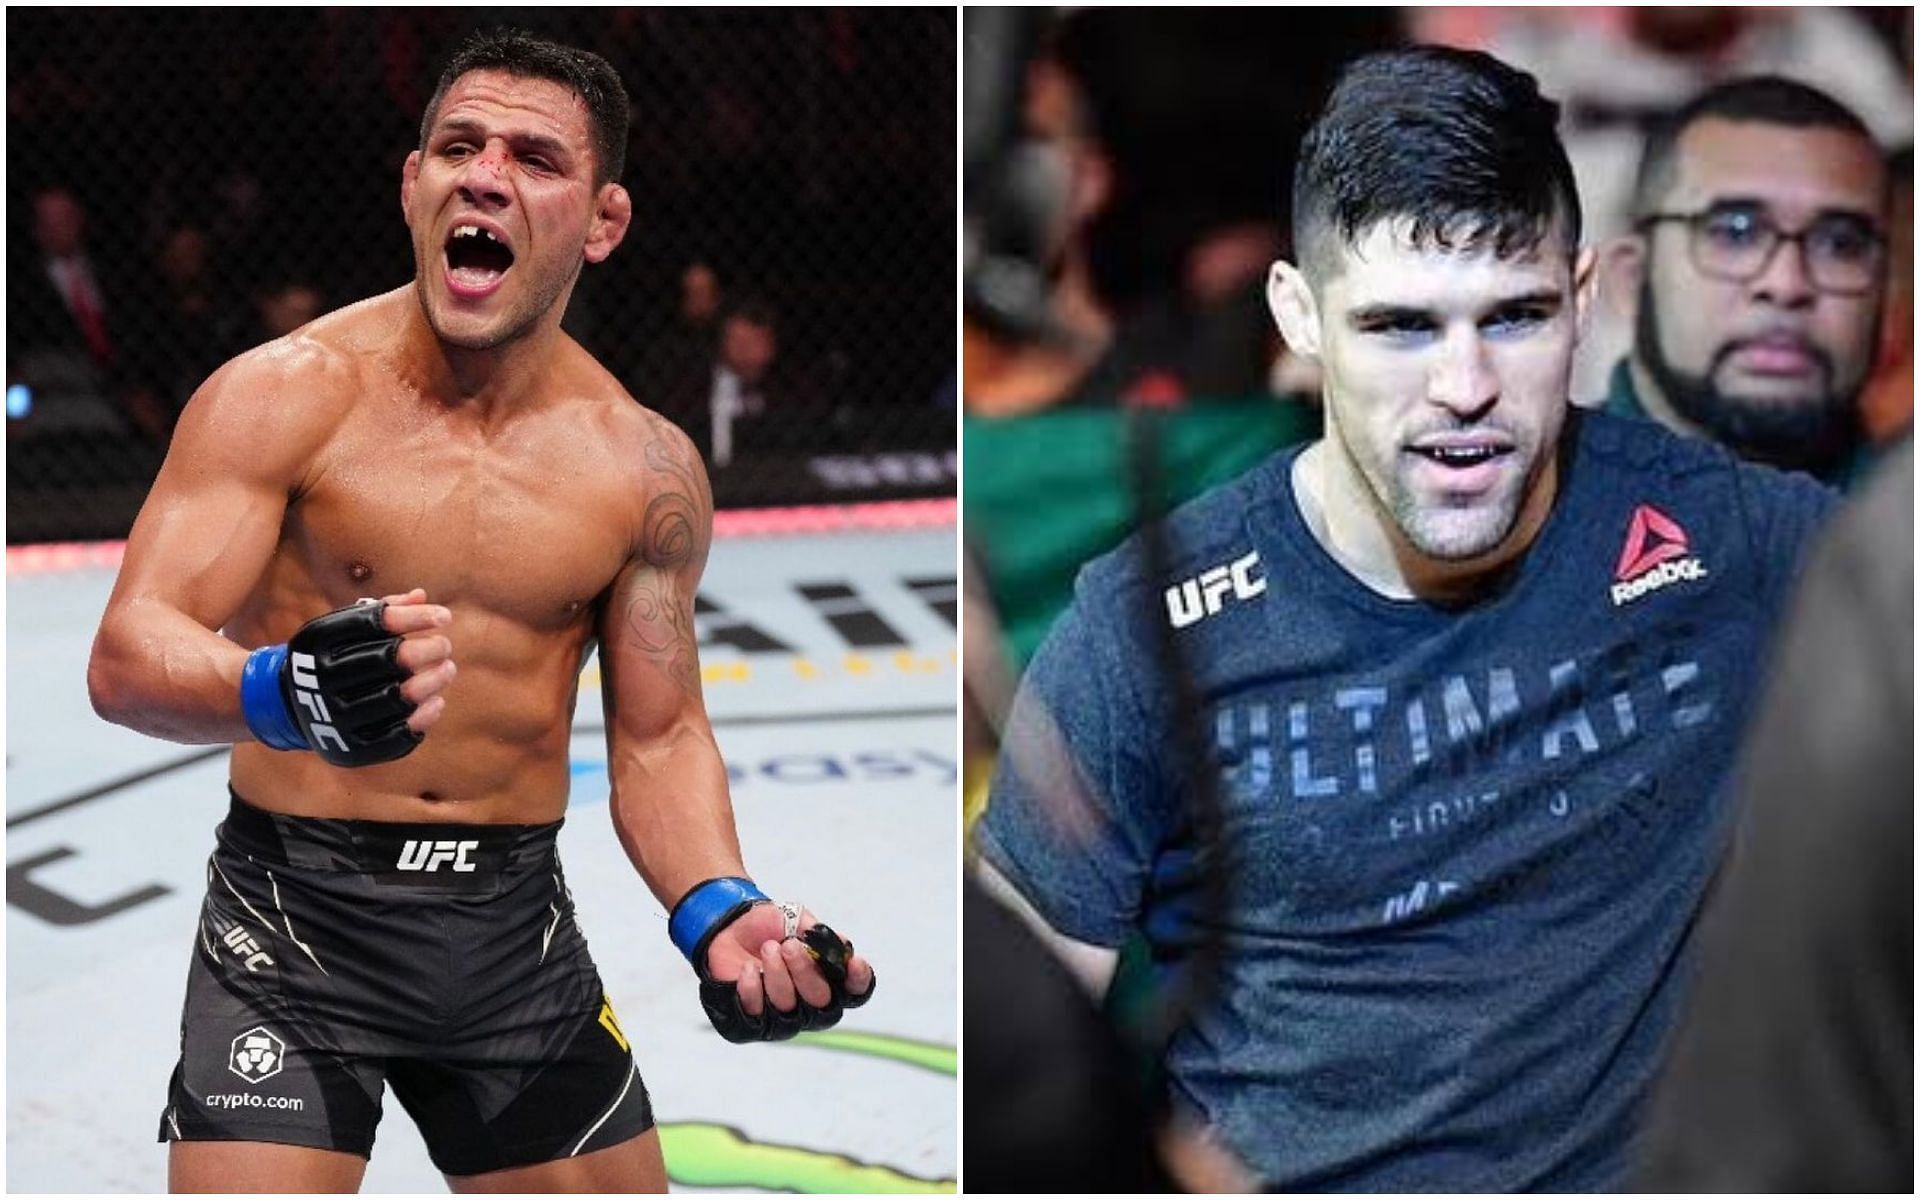 UFC Welterweight banger between Rafael dos Anjos and Vicente Luque postponed 